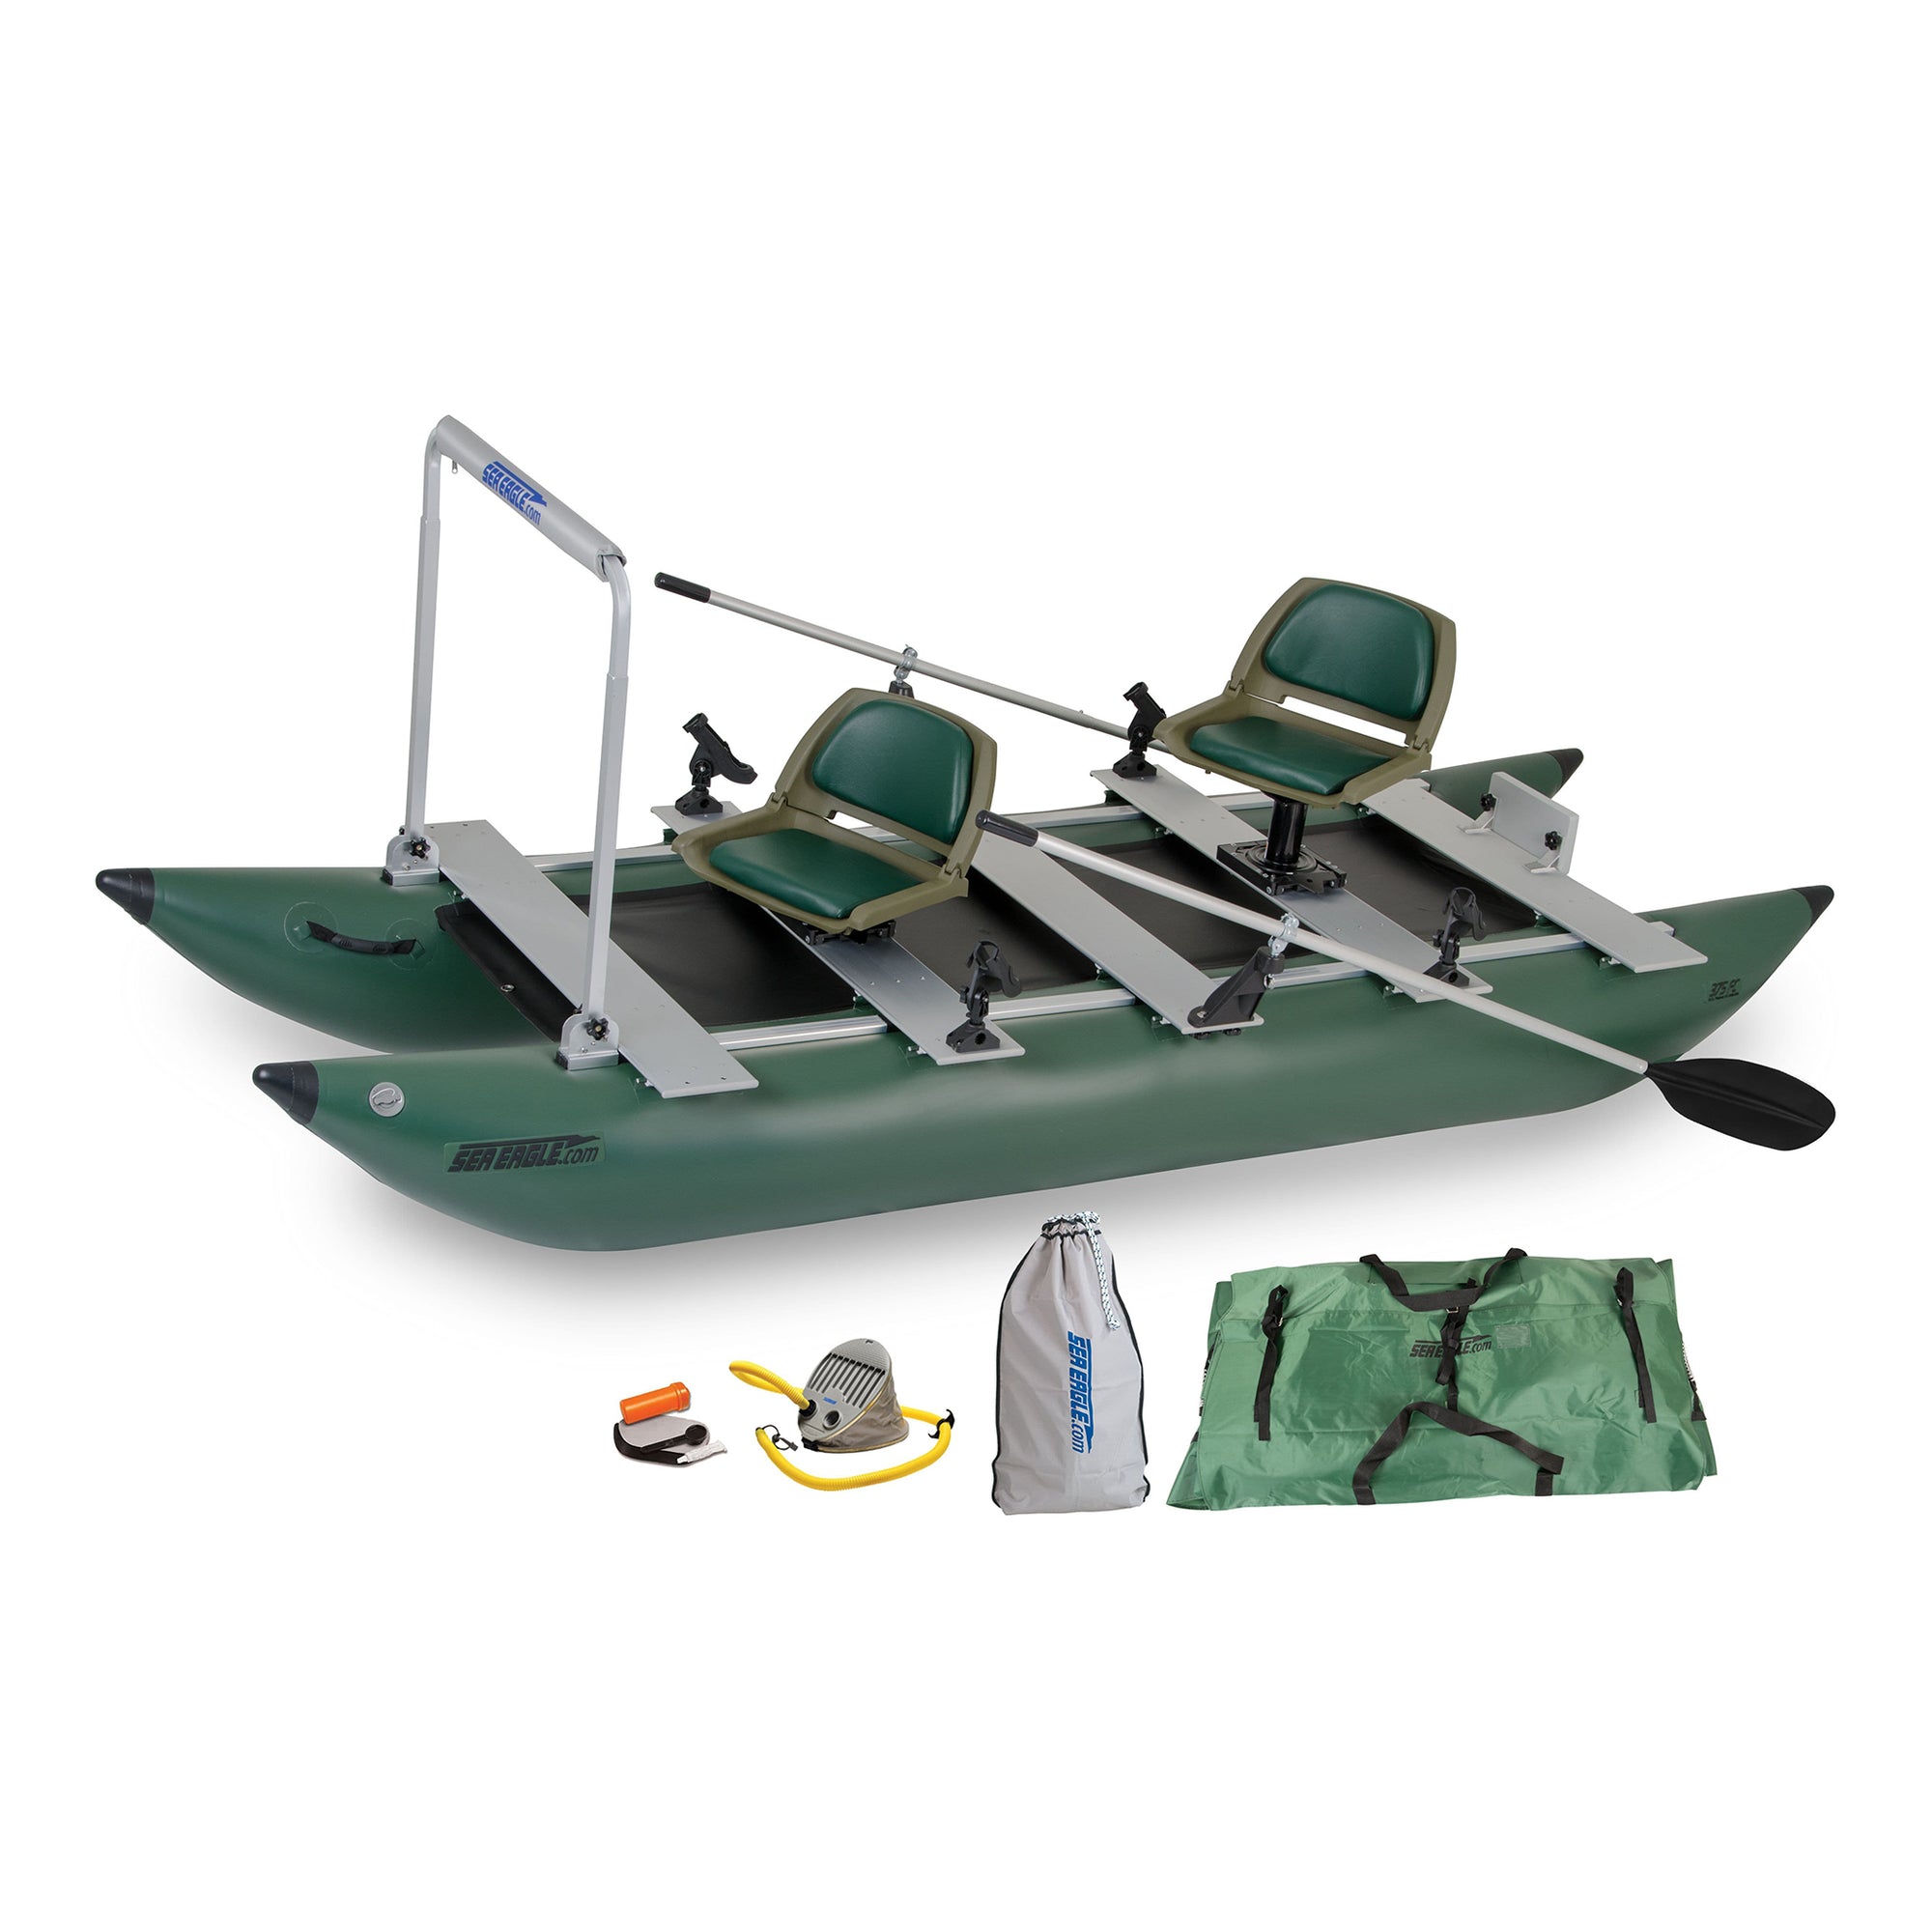 https://cdn.shopify.com/s/files/1/0683/3091/4071/products/seaeagle-foldcat-packages-sea-eagle-375fc-2-person-12-4-green-foldcat-pro-angler-guide-pontoon-package-hull-fishing-boat-375fck-p-15931159412873_ff791188-2e94-4204-95db-45560dc6_2000x.jpg?v=1682335763